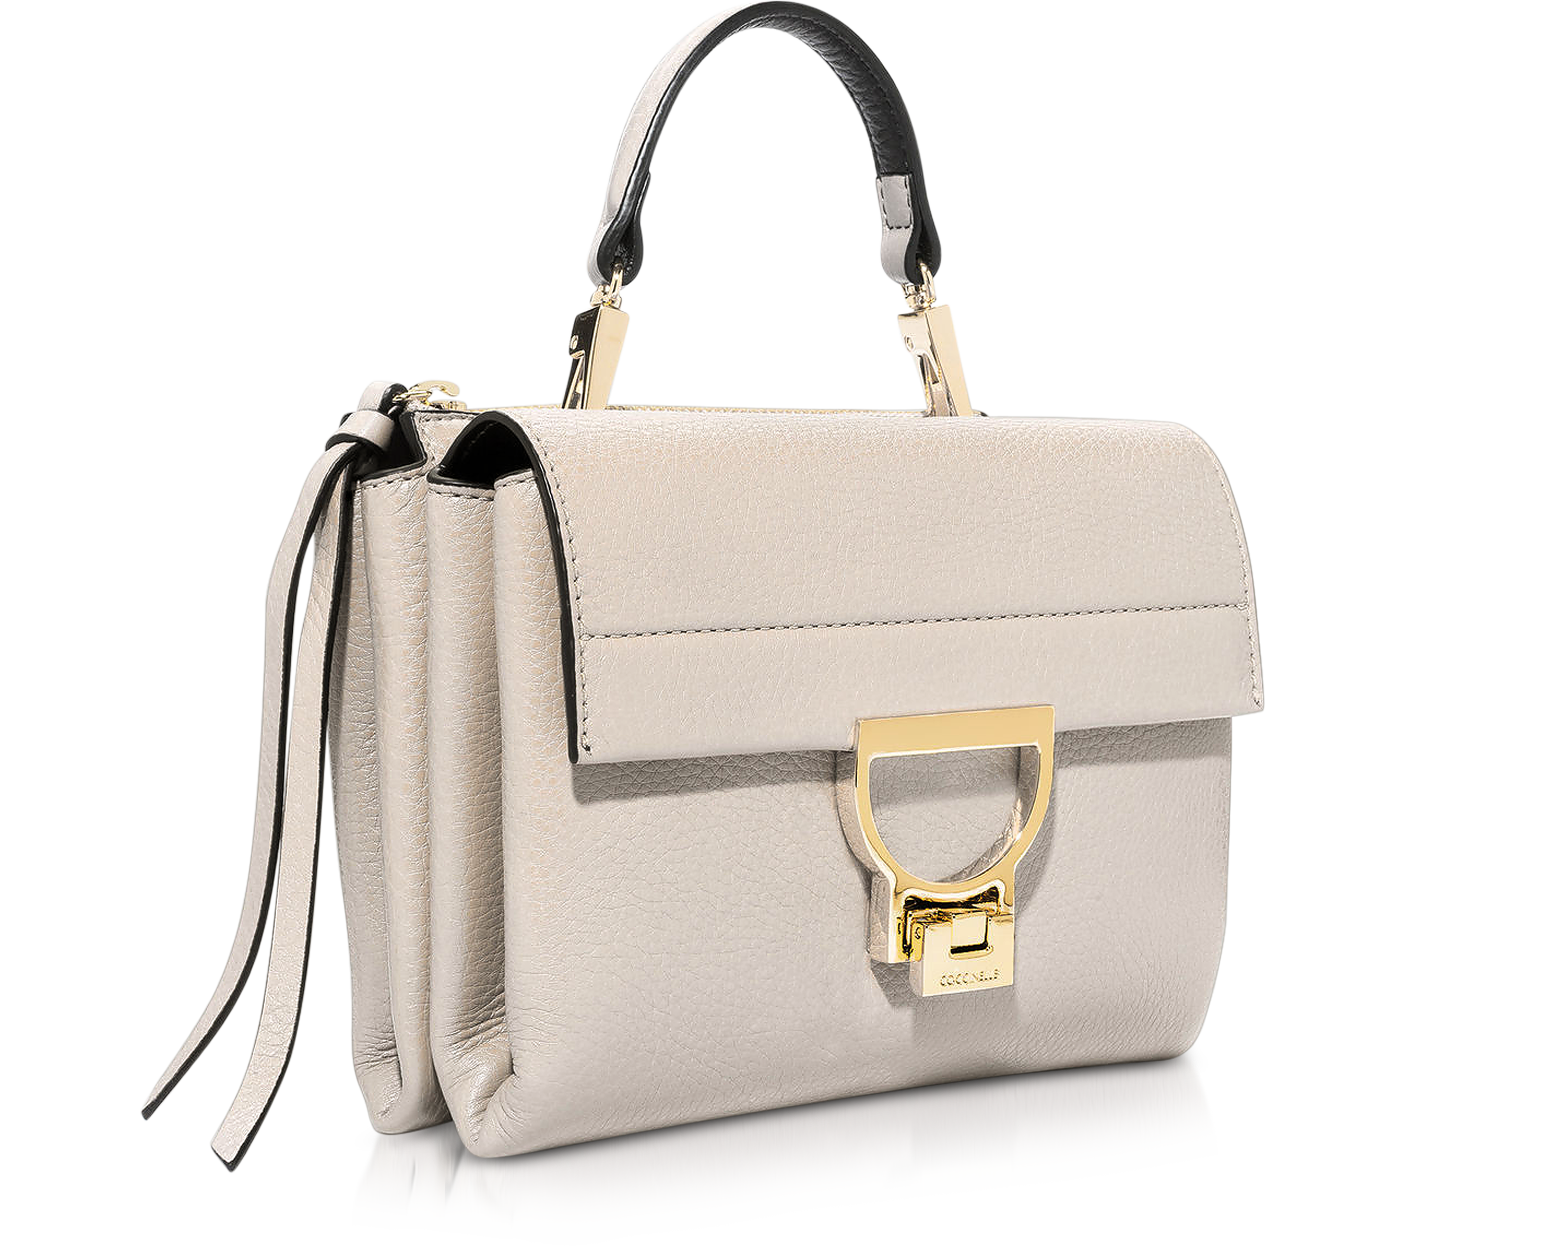 Coccinelle Seashell Arlettis Mini Leather Shoulder Bag at FORZIERI